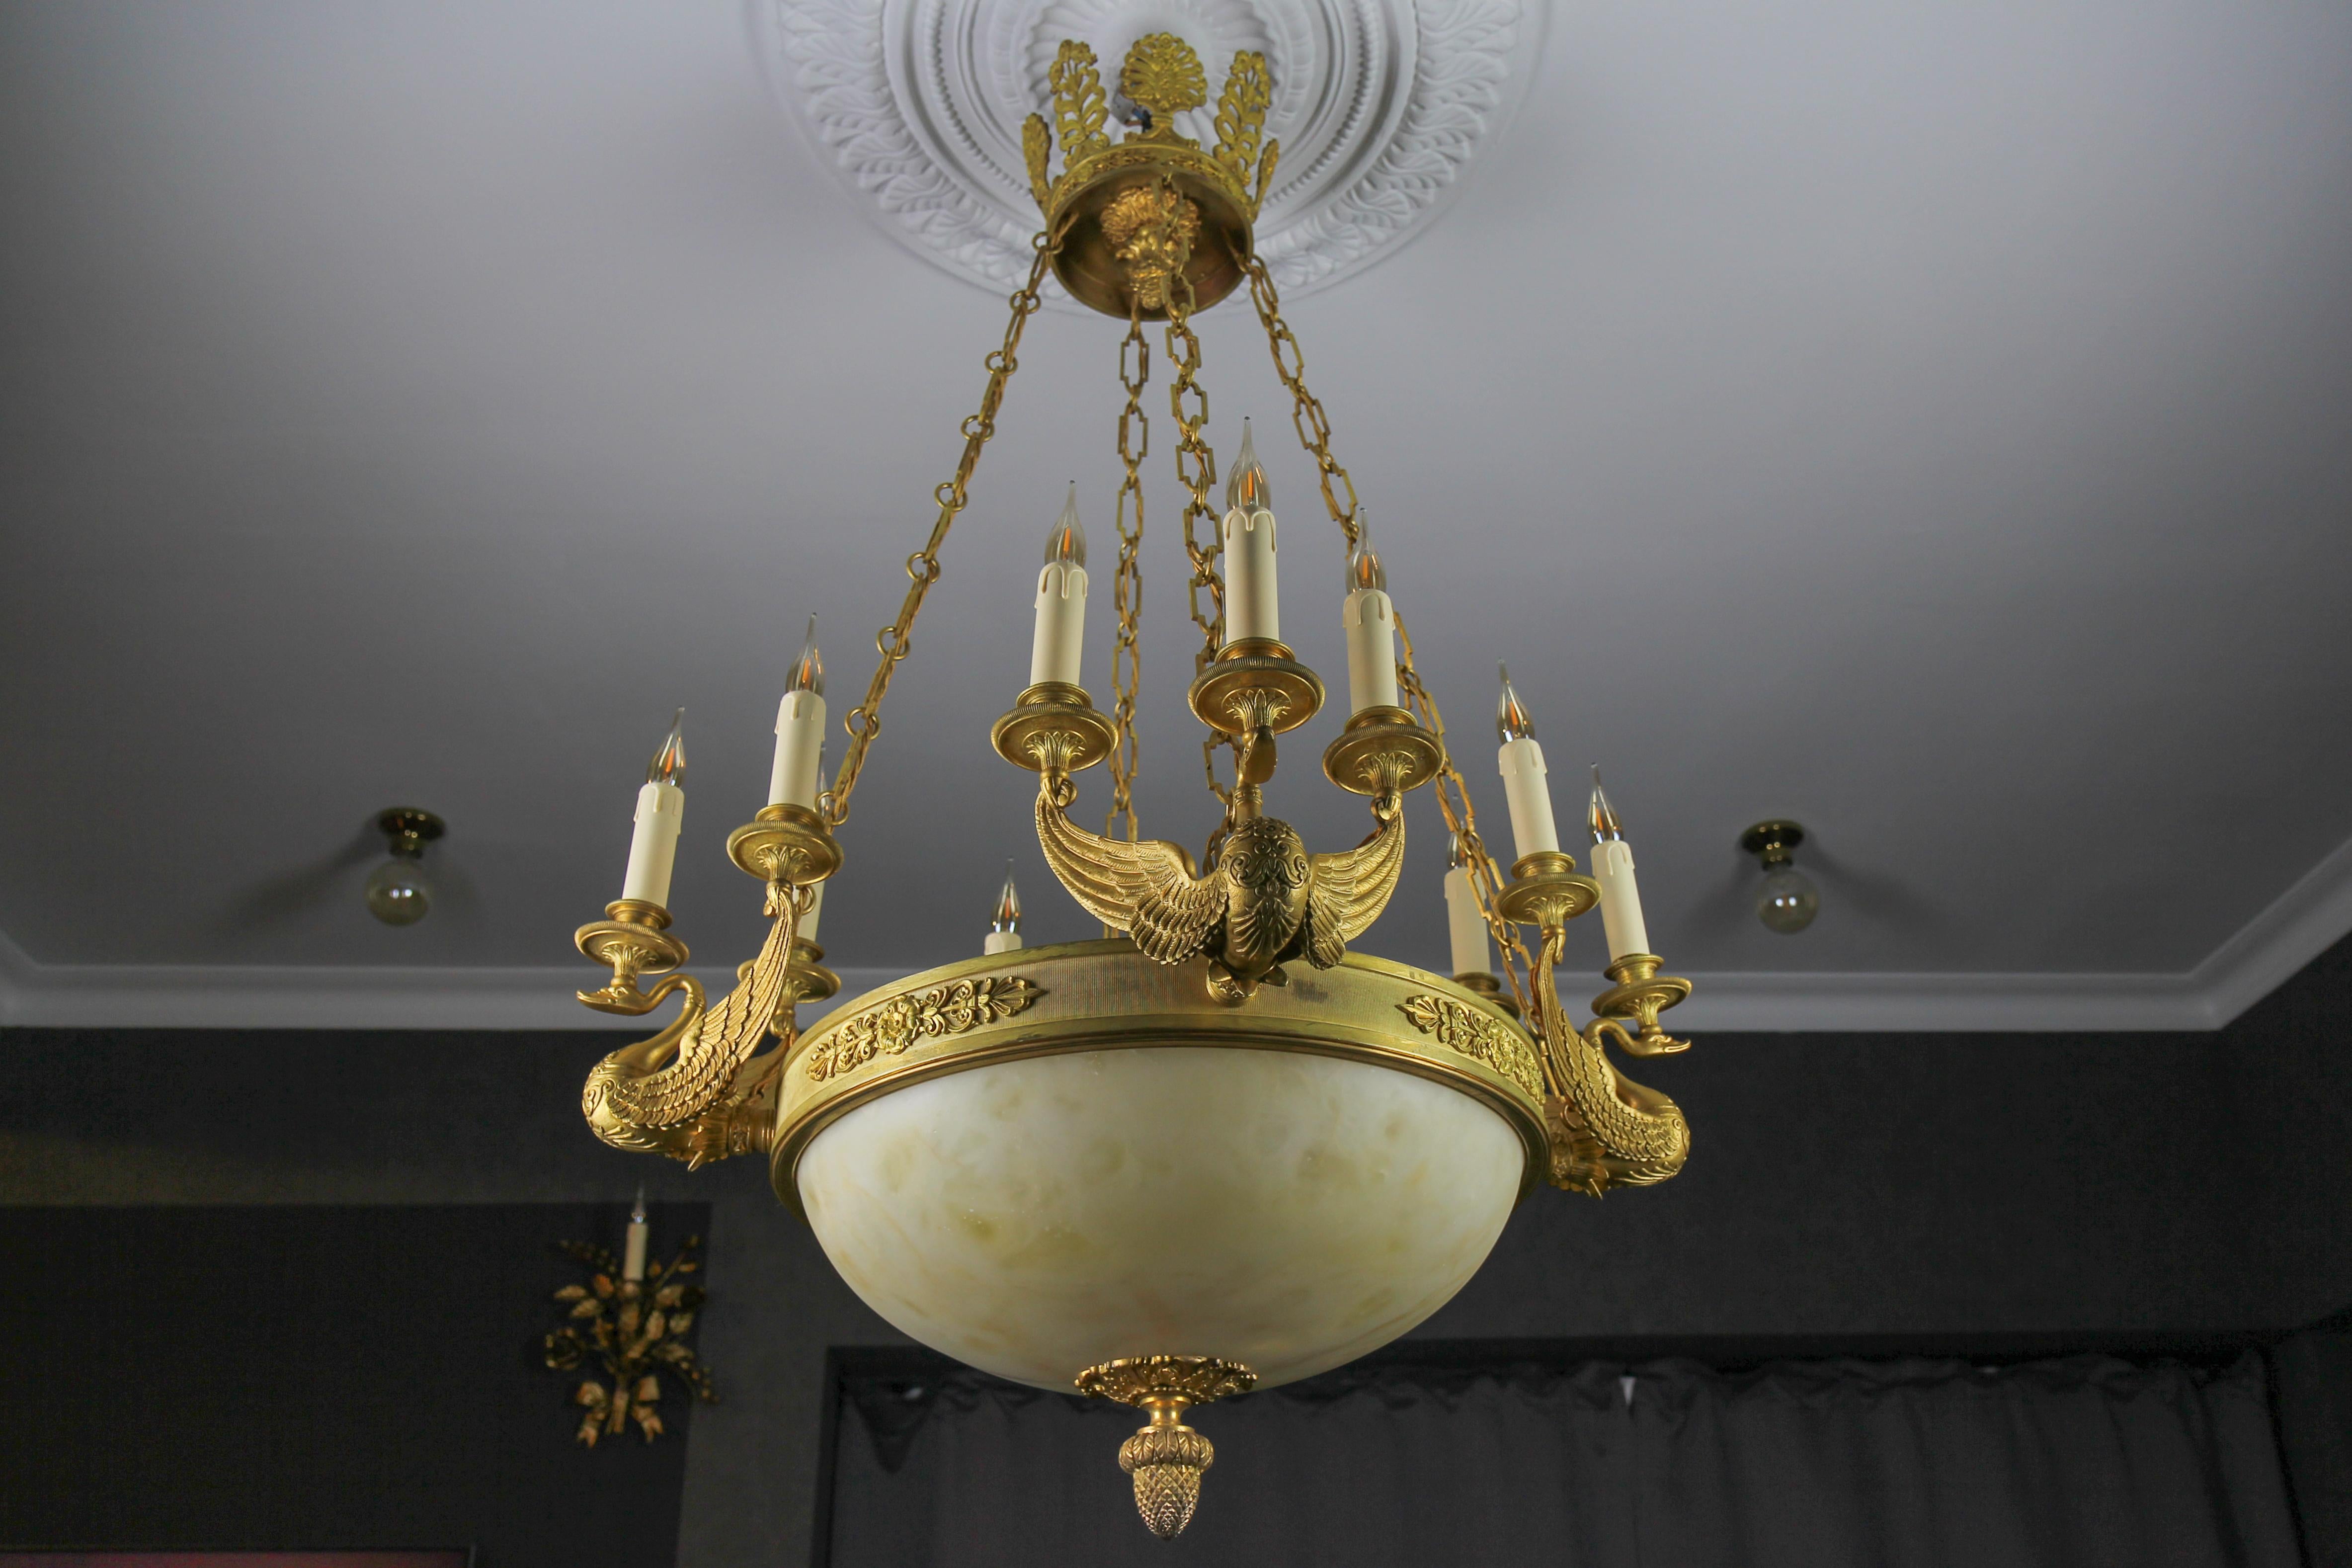 Magnificent and impressive Empire-style bronze and alabaster sixteen-light chandelier from the late 19th century; later has been electrified. The circular ring with four large majestic finely cast swan branches each supporting three lights with